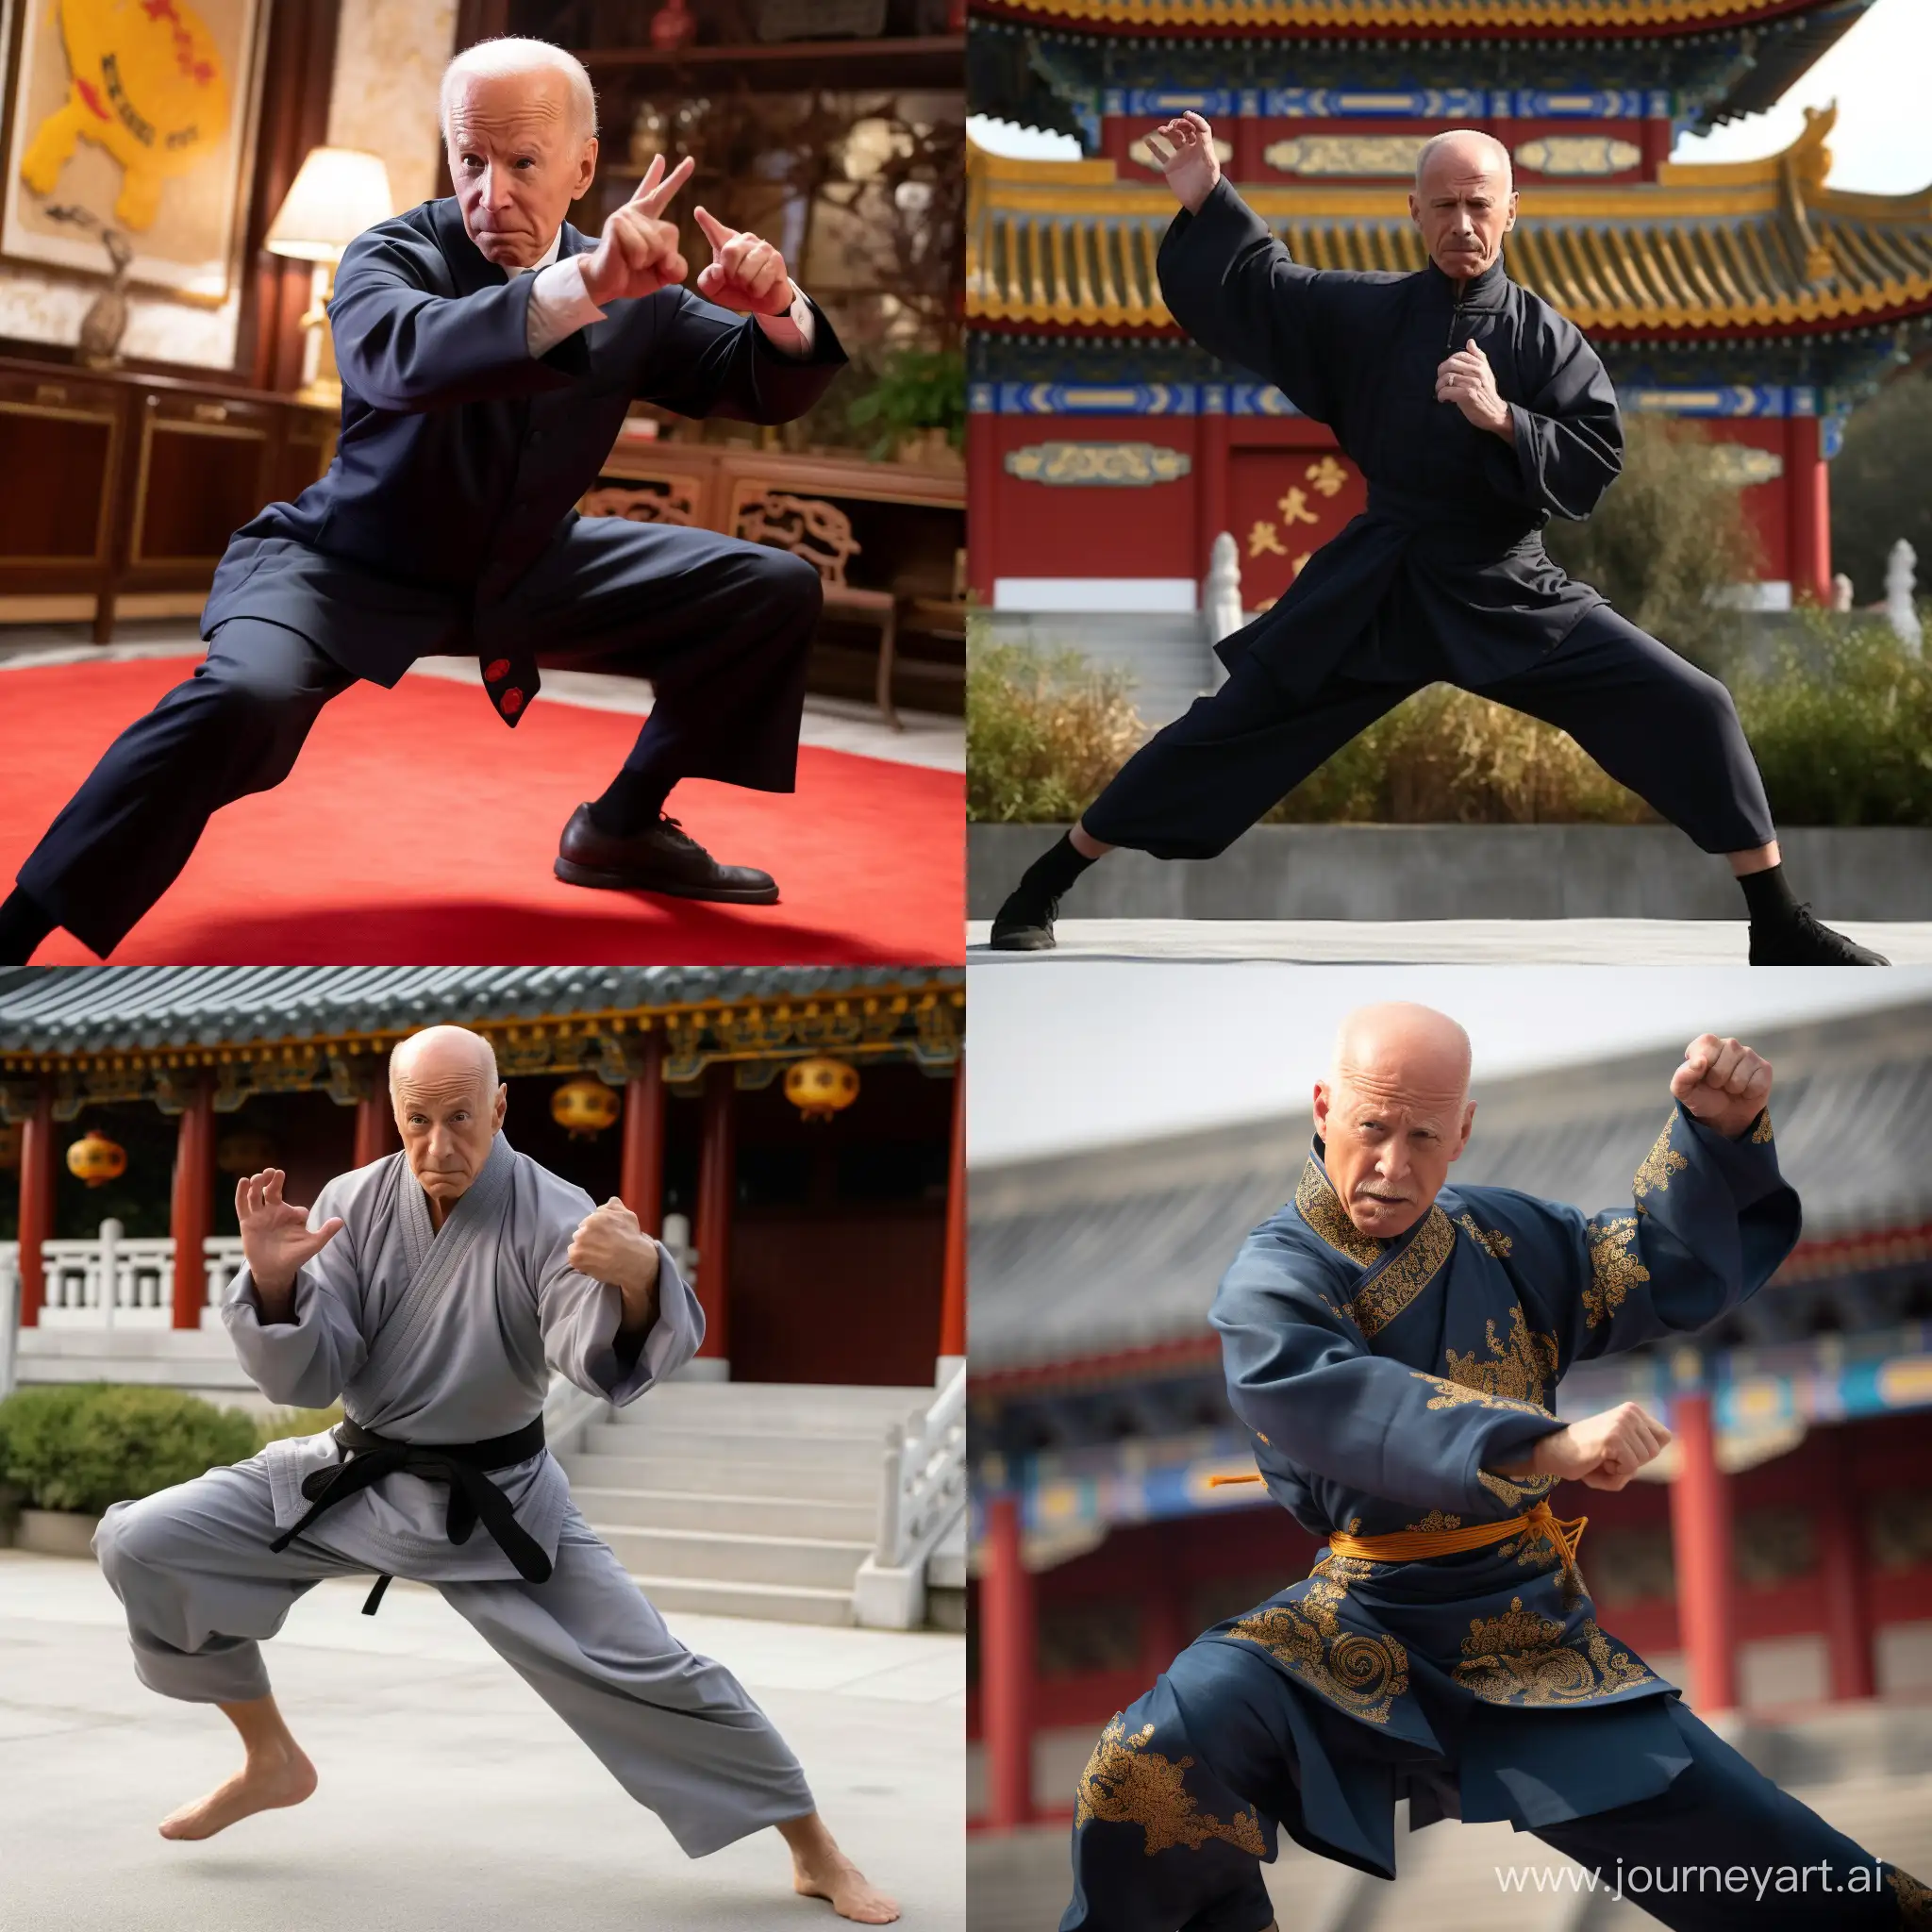 Joe-Biden-Engages-in-Kung-Fu-Play-with-Dynamic-Martial-Arts-Pose